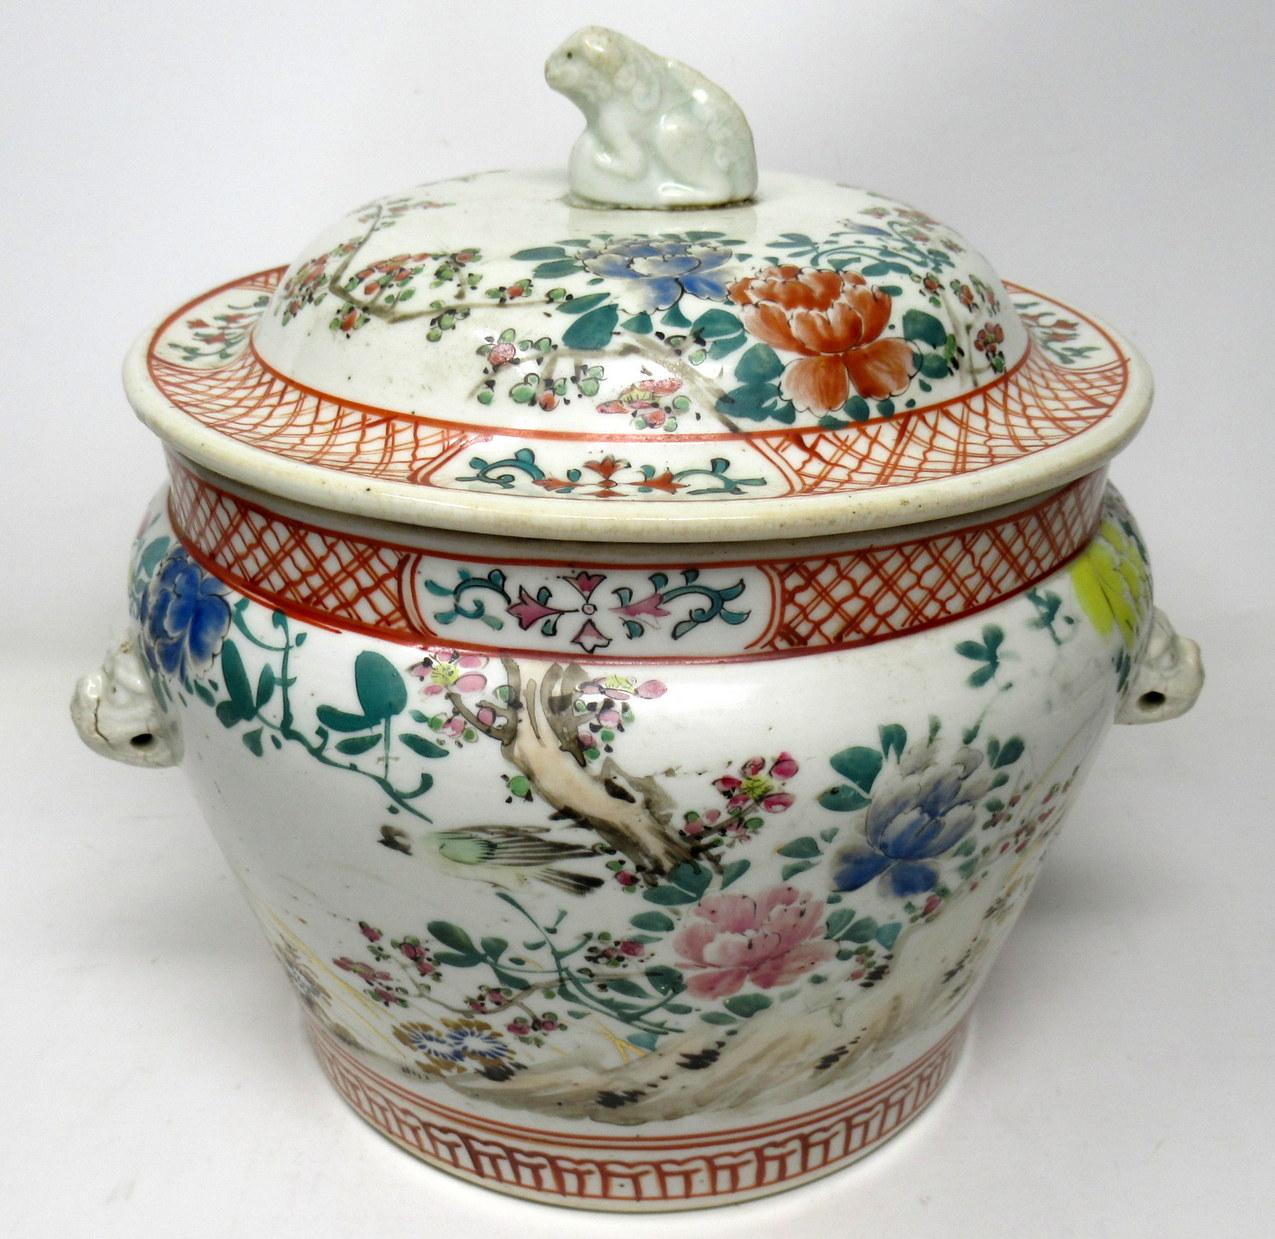 Stunning large Japanese or Chinese Famille rose lidded single jar of large proportions, made during the last quarter of the 19th century or possible a little later. 

The globular tapering body rising to a rounded shoulder, complete with its